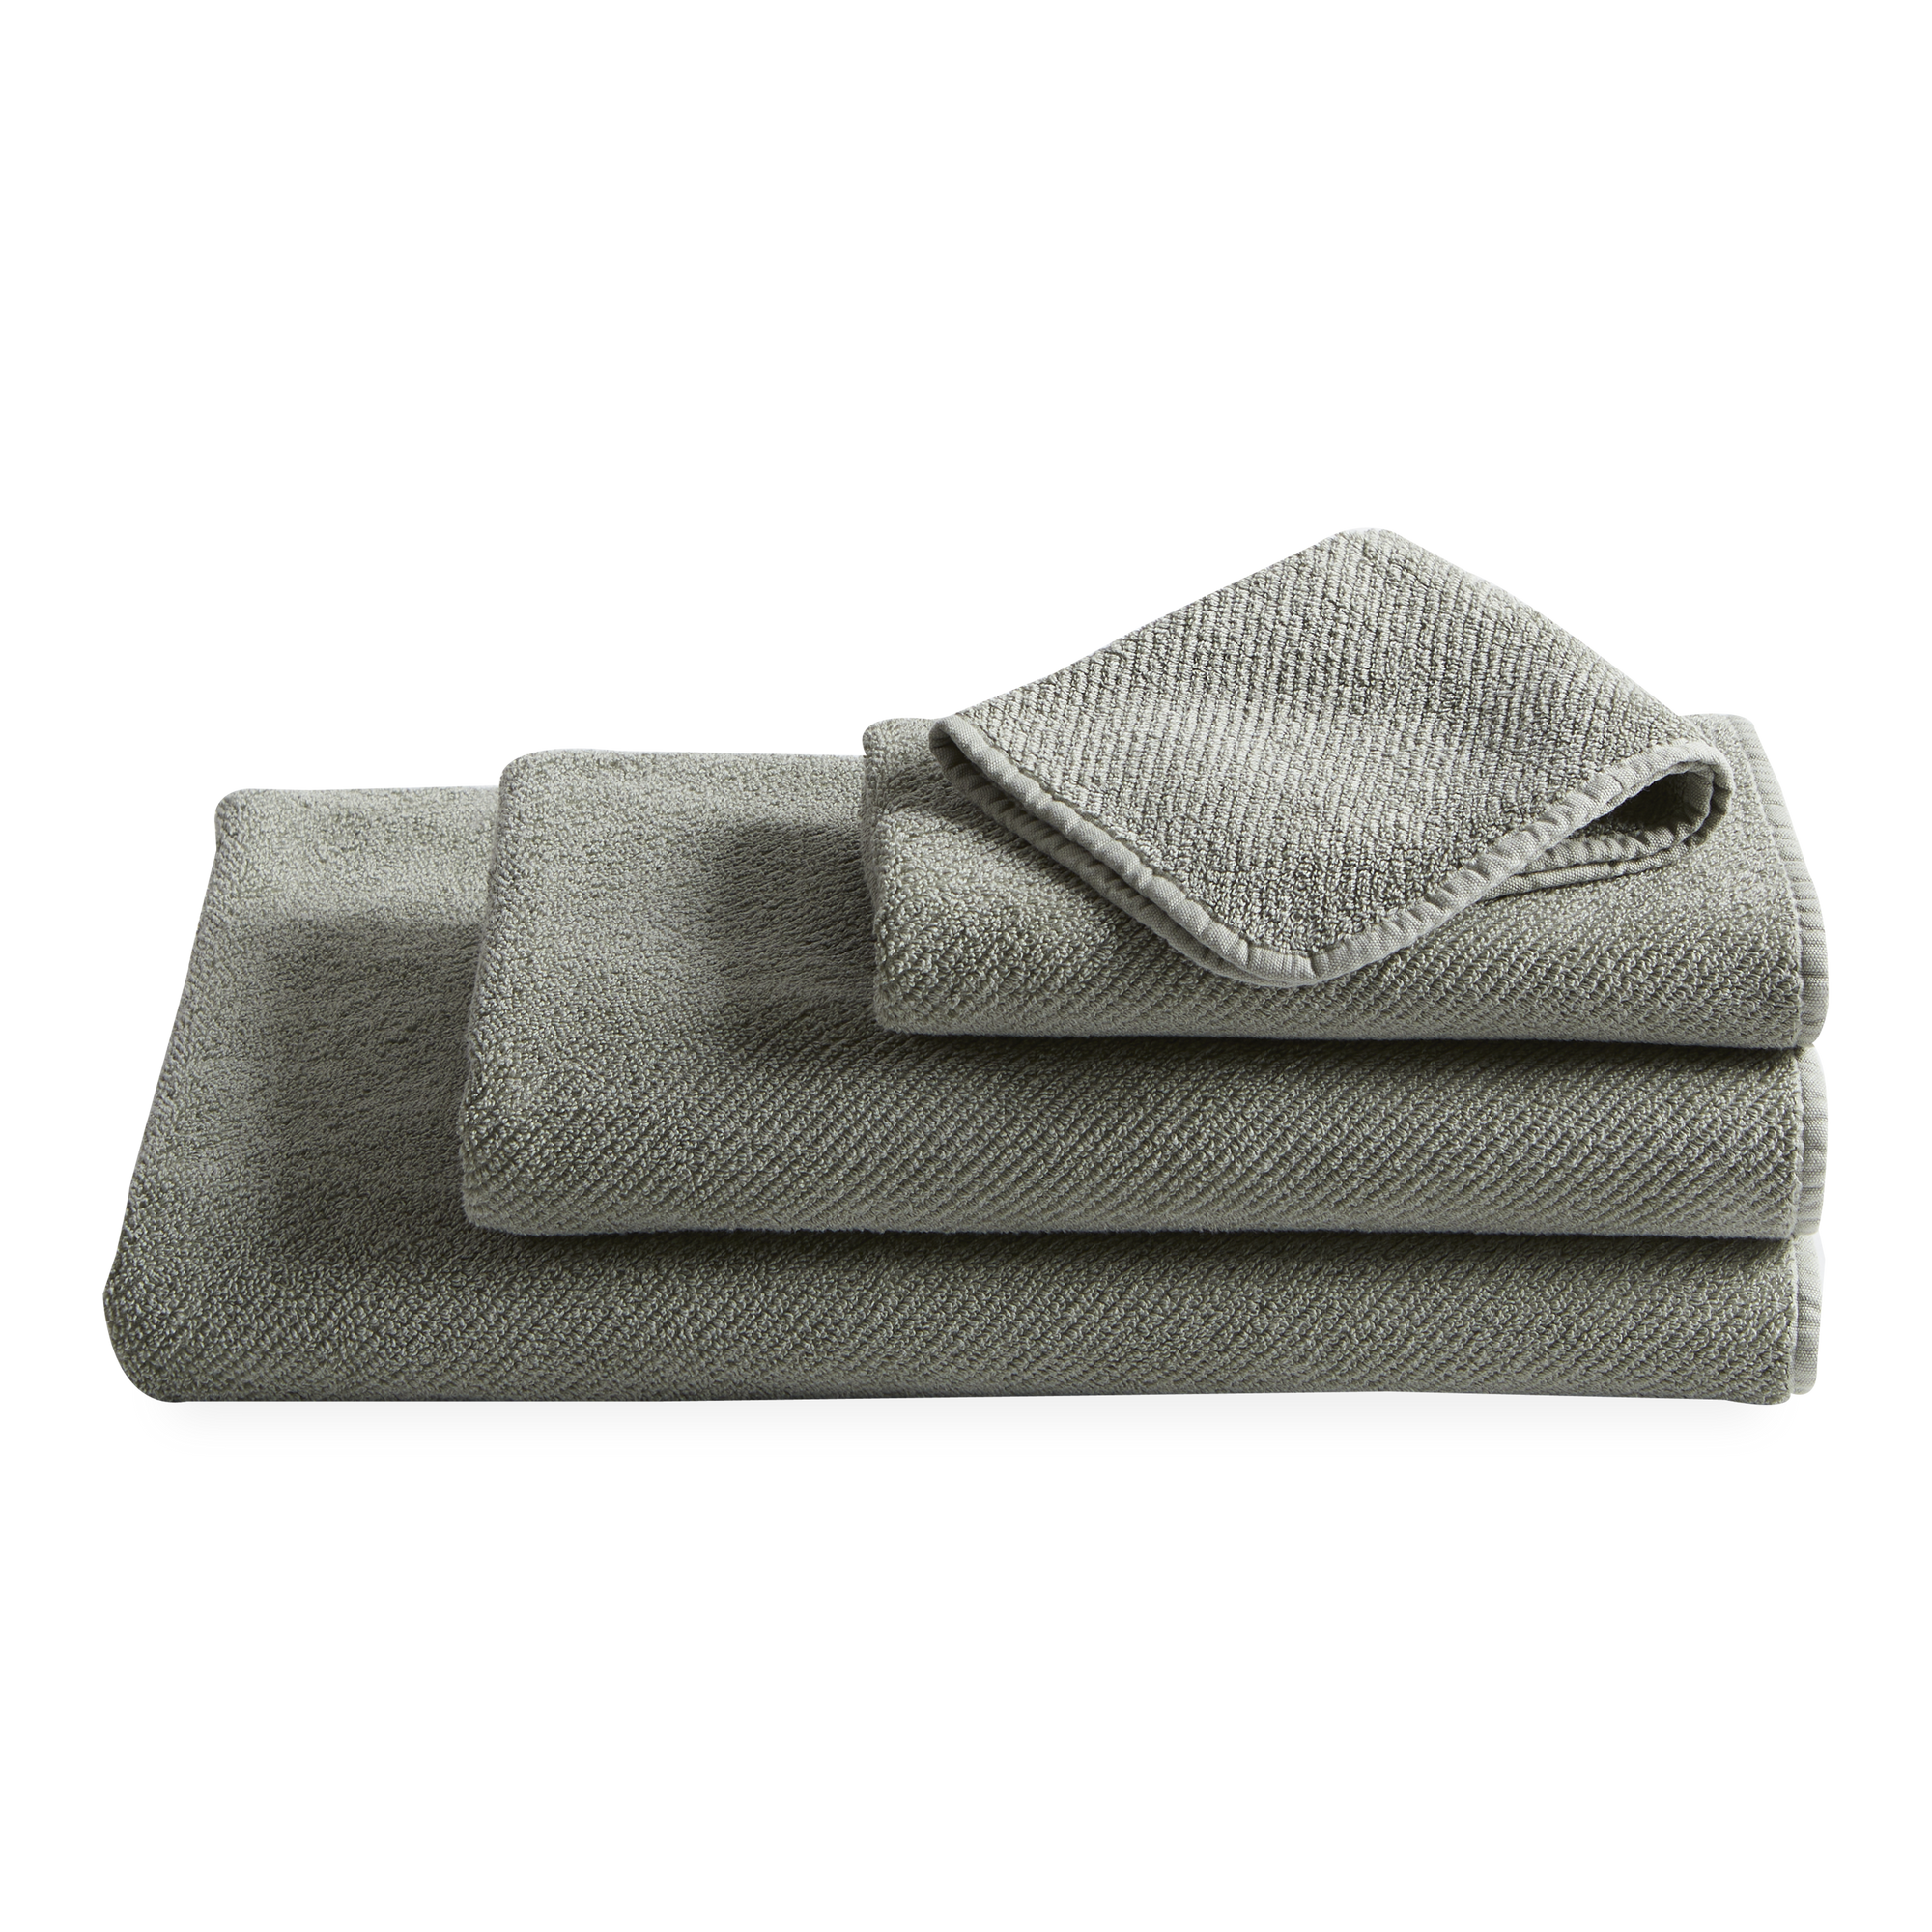 A lesson in timeless design the Twill towel collection is the perfect everyday towel.